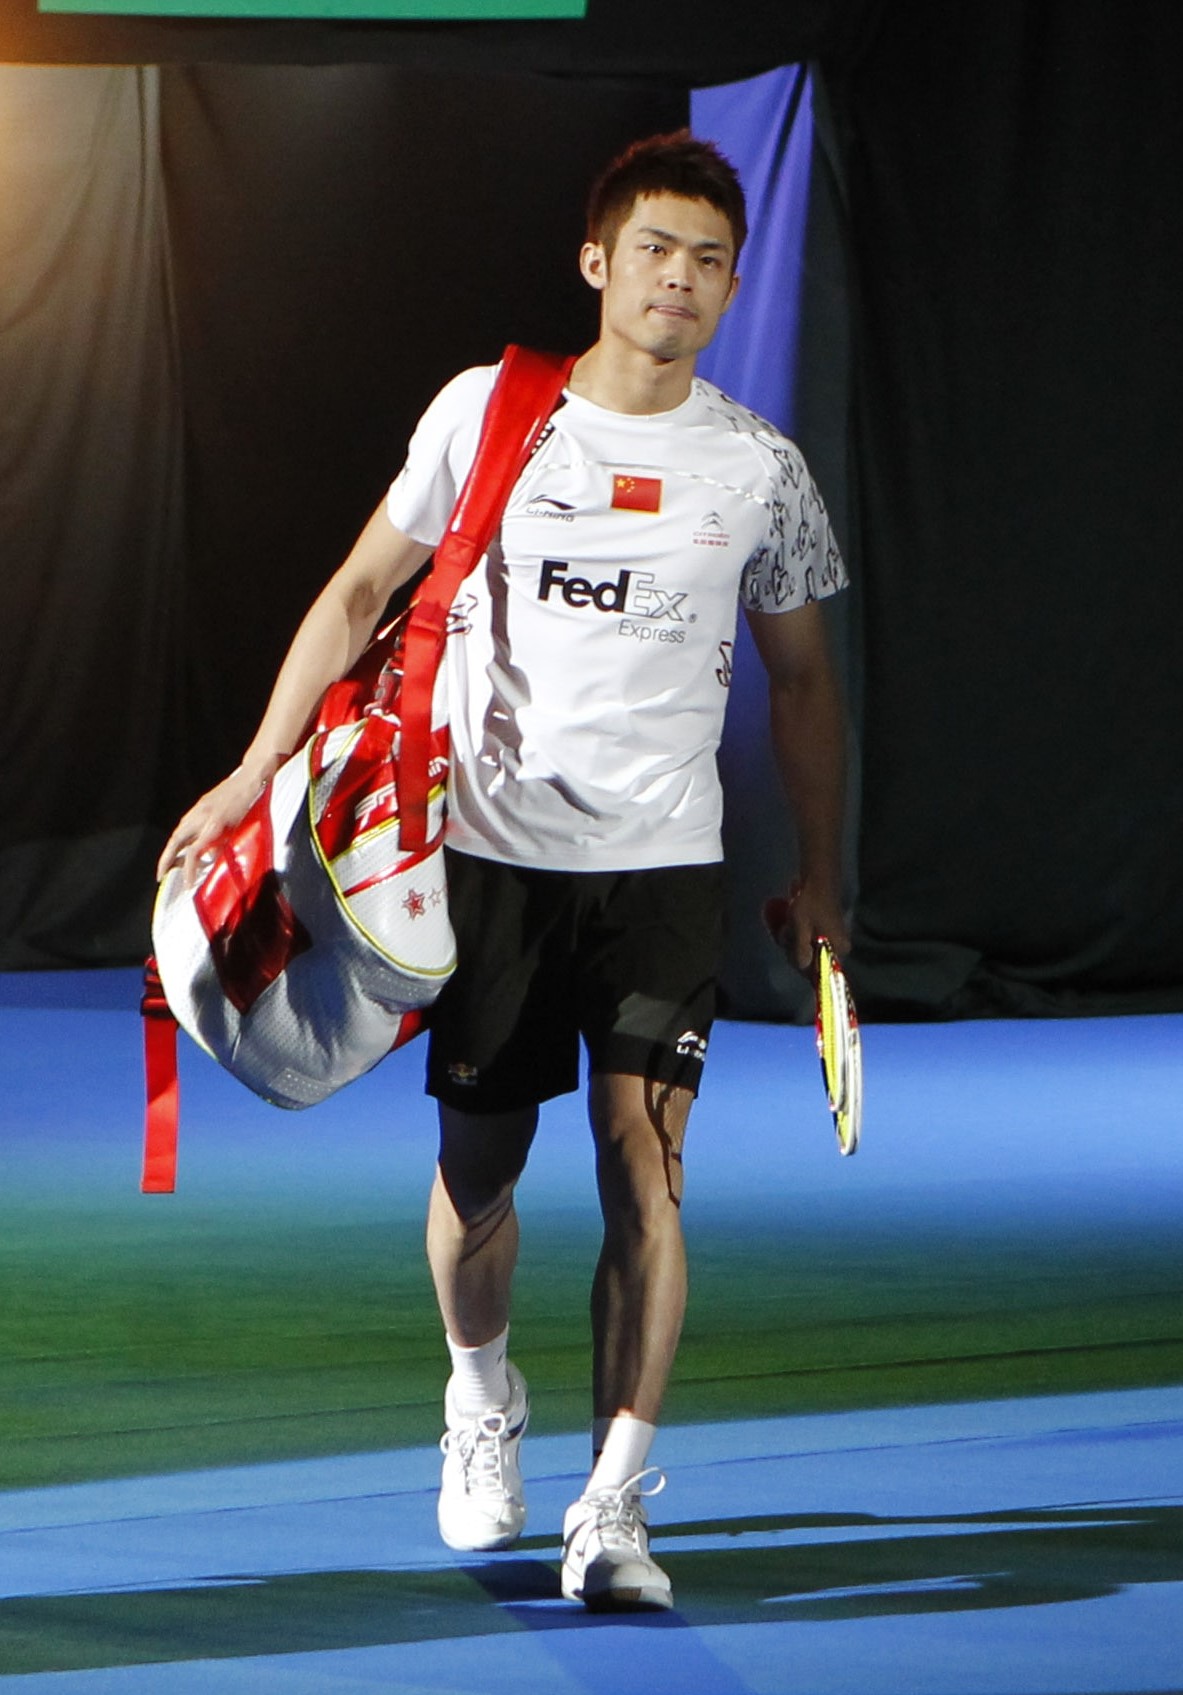 7 Essential Items You Should Have In Your Badminton Kit/Gear Bag